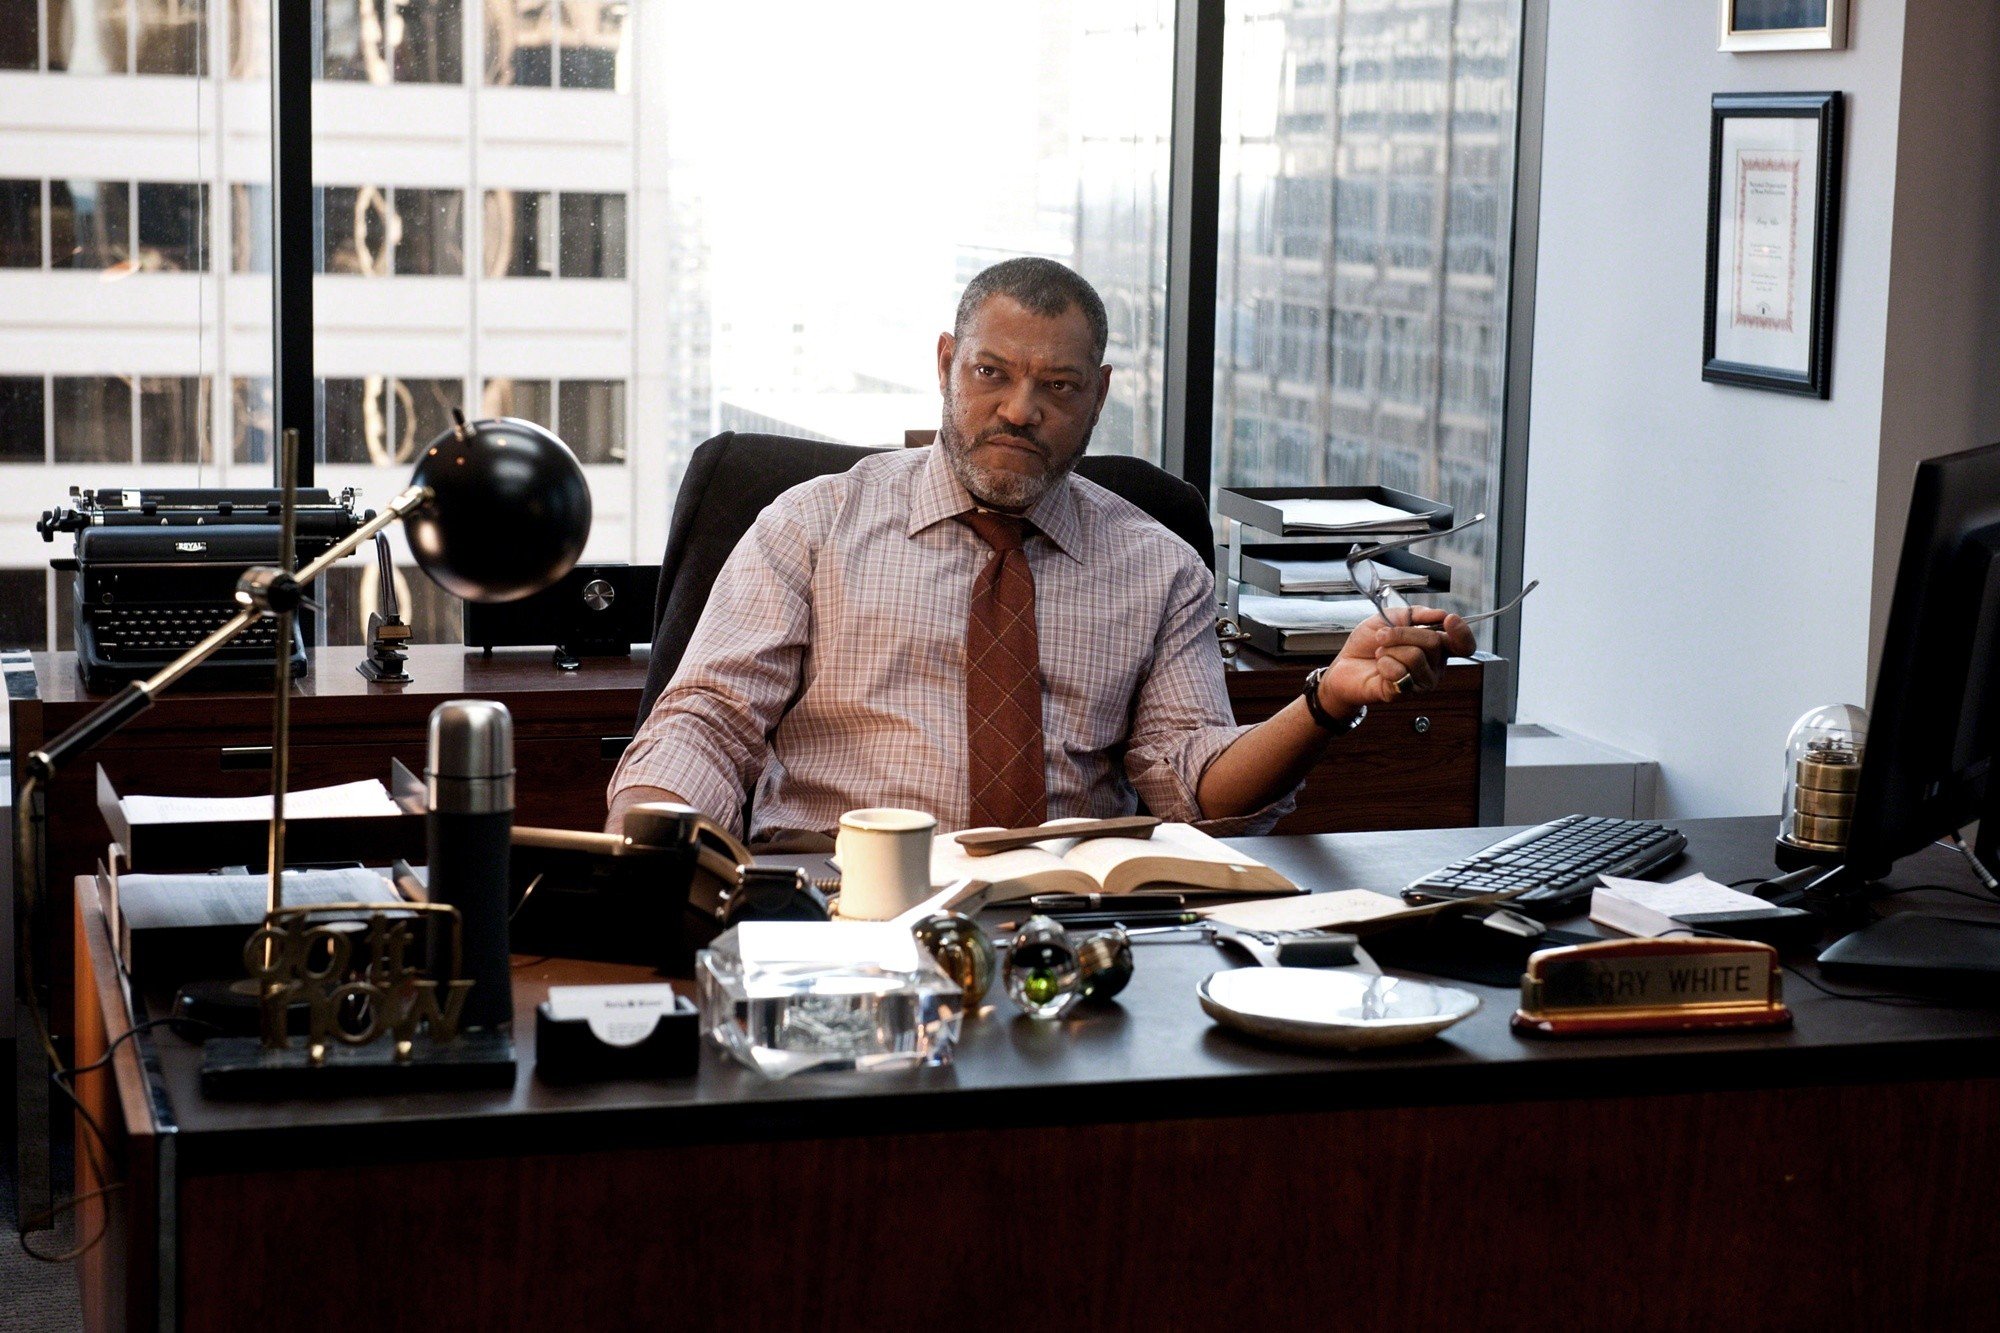 Laurence Fishburne stars as Perry White in Warner Bros. Pictures' Man of Steel (2013)